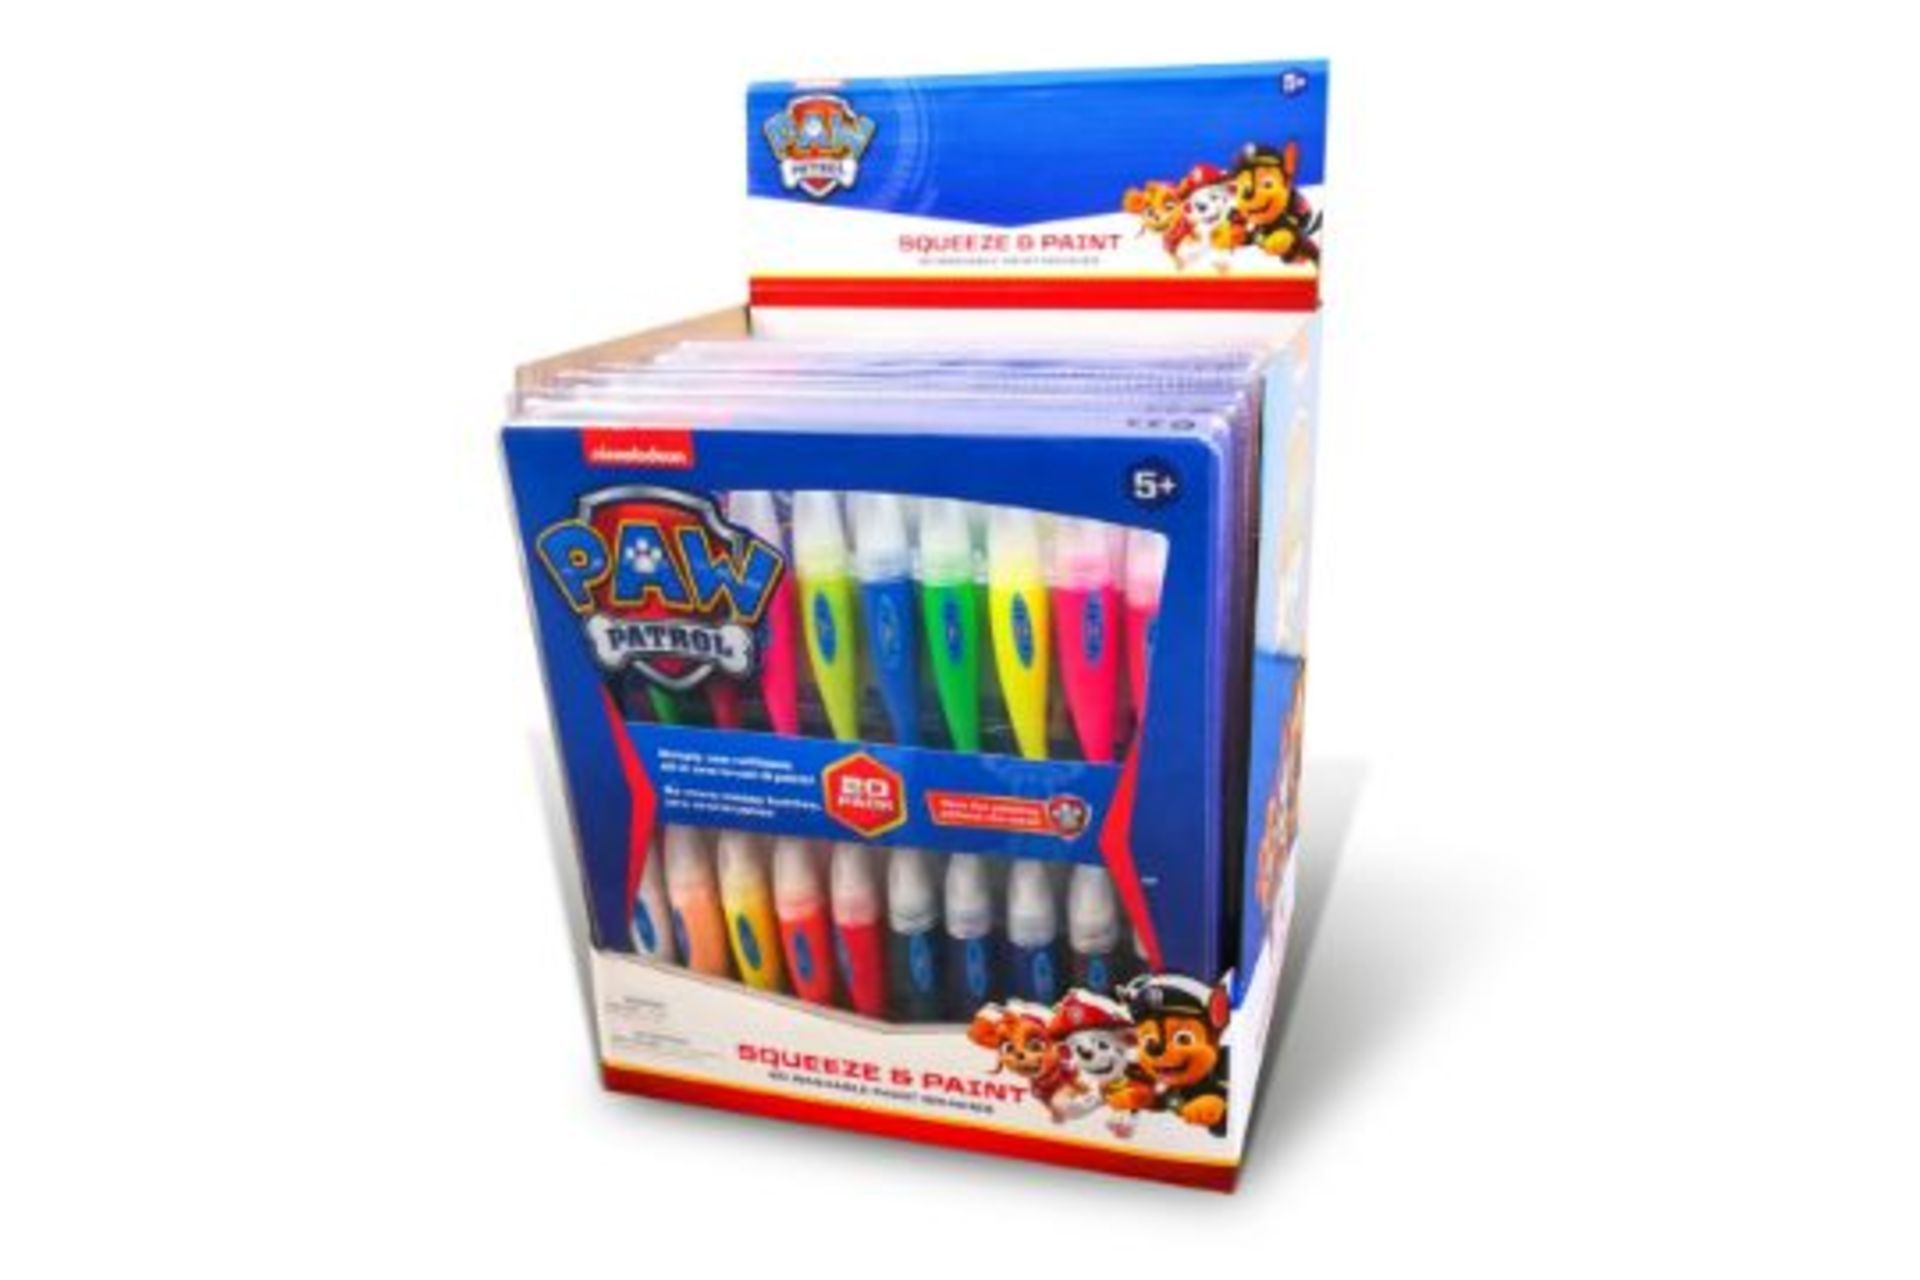 TRADE LOT 48 X PACKS OF 20 NICKELODEON PAW PATROL SQUEEZE & PAINT WASHABLE PAINT BRUSH SETS (ROW5/